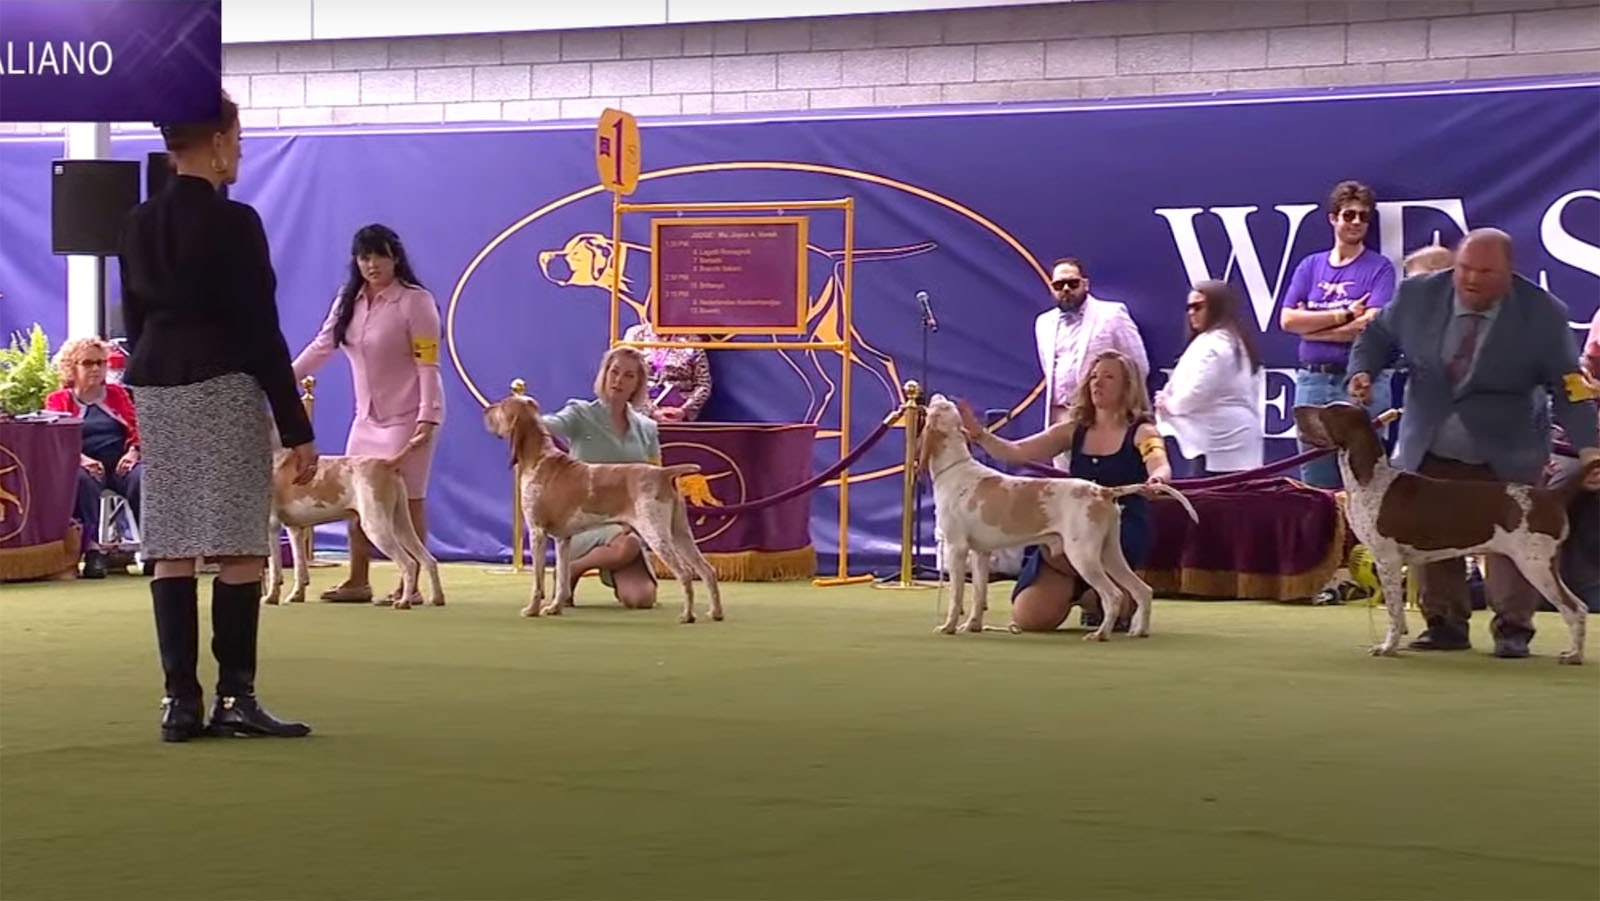 A screenshot from the Westminster Kennel Club Dog Show shows the beginning of competition for the Bracco Italiano breed. Rowan and handler, Natasha Wilson, are second from left.